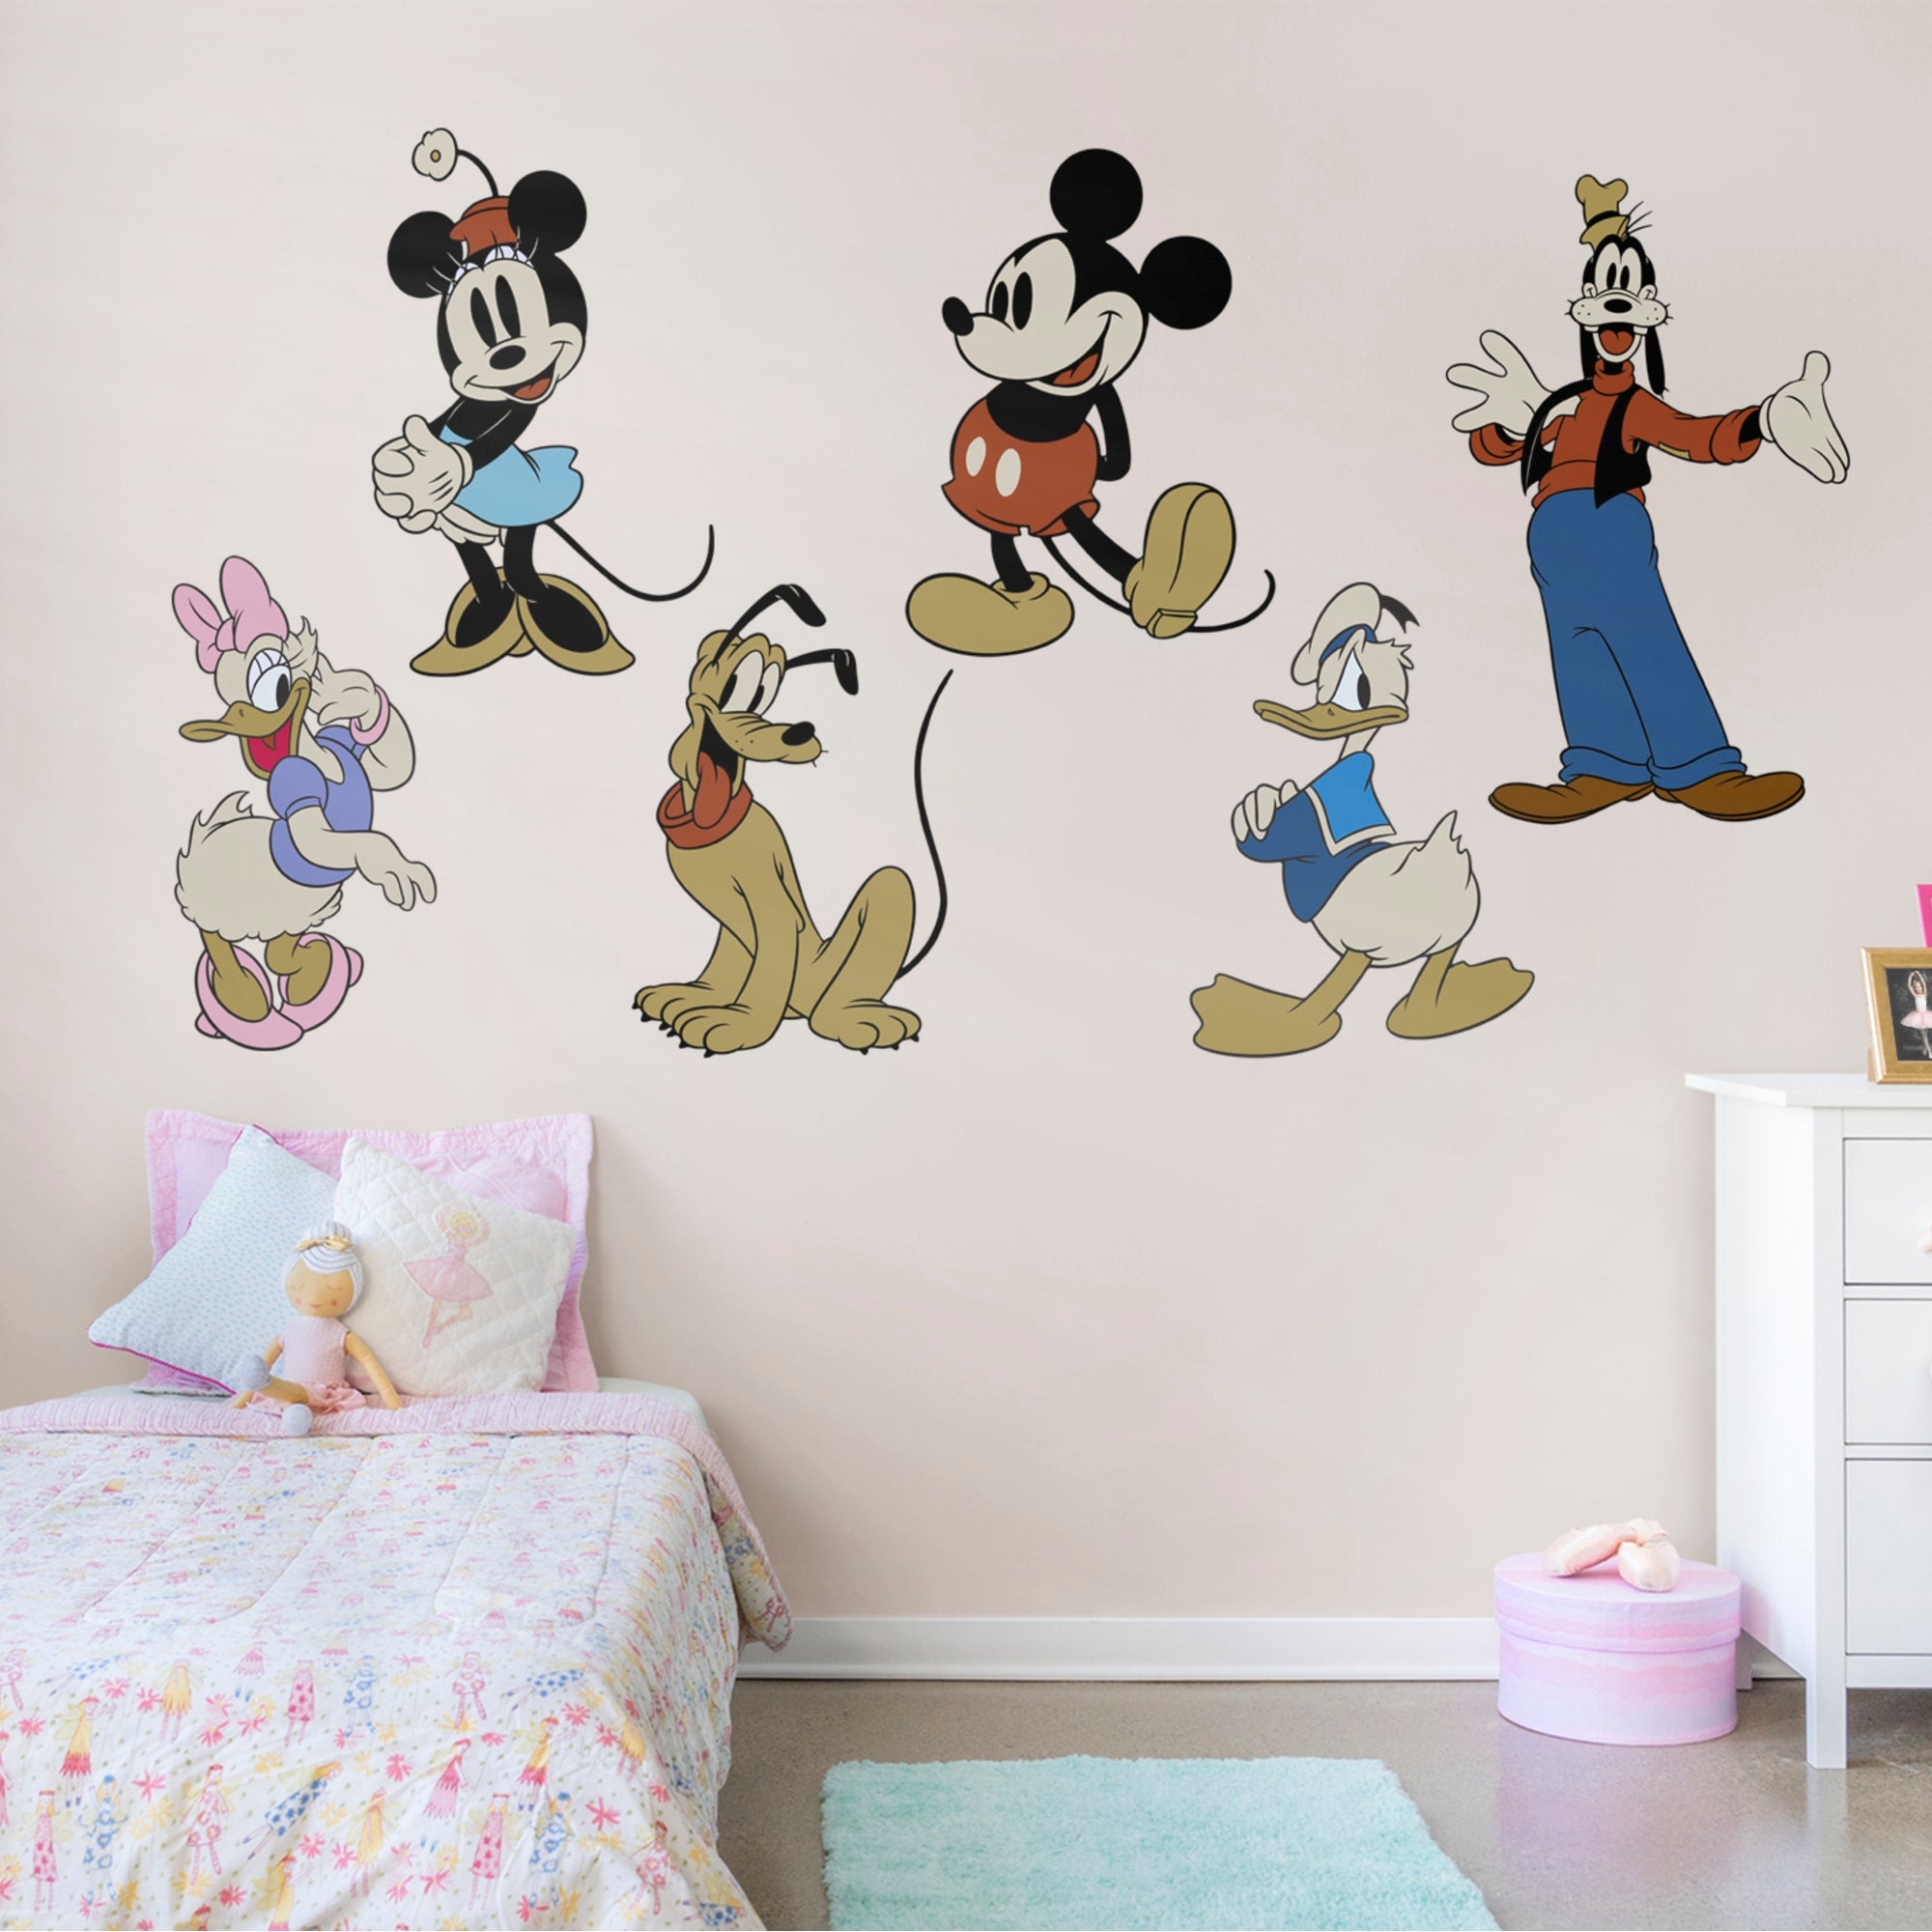 Disney: Classic Mickey & Friends - Officially Licensed Disney Removable Wall Decal 80.0"W x 51.0"H by Fathead | Vinyl